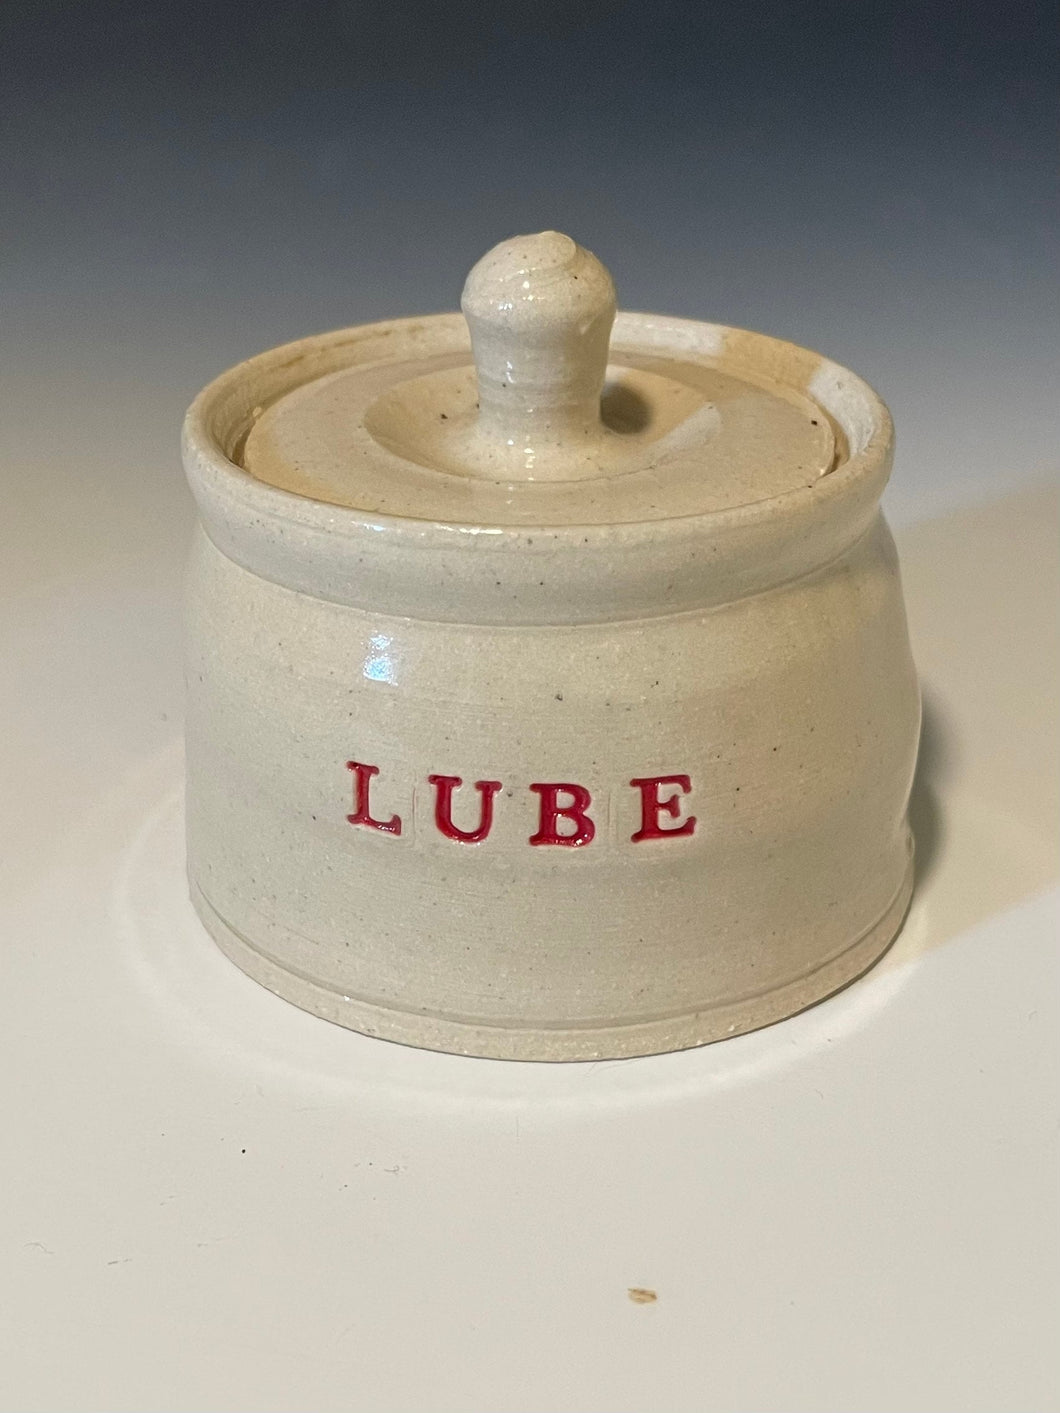 Tiny Lube Jar. for Lubing your nipples or undercarriage